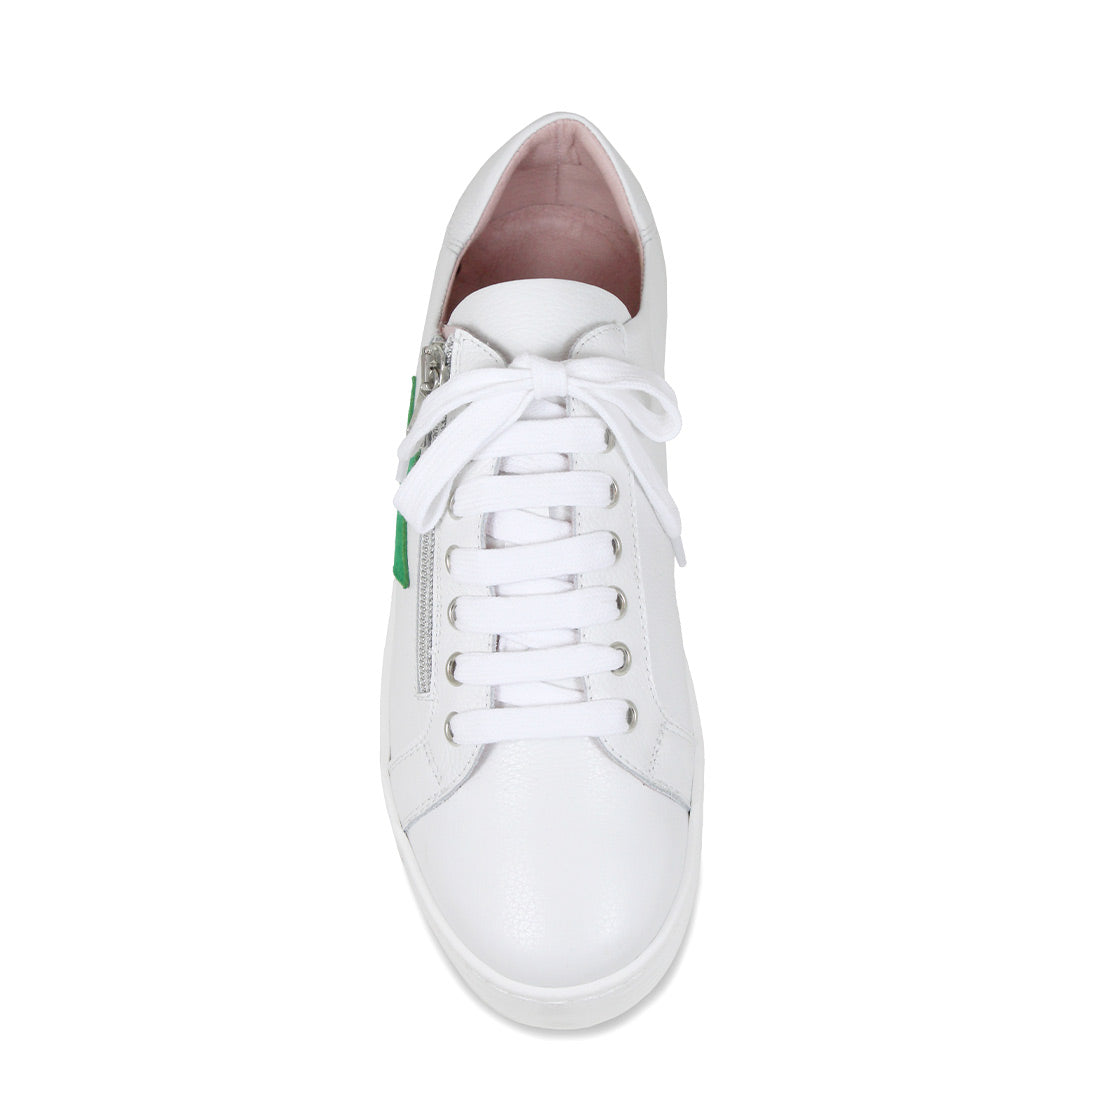 Star: White Leather & Emerald Suede